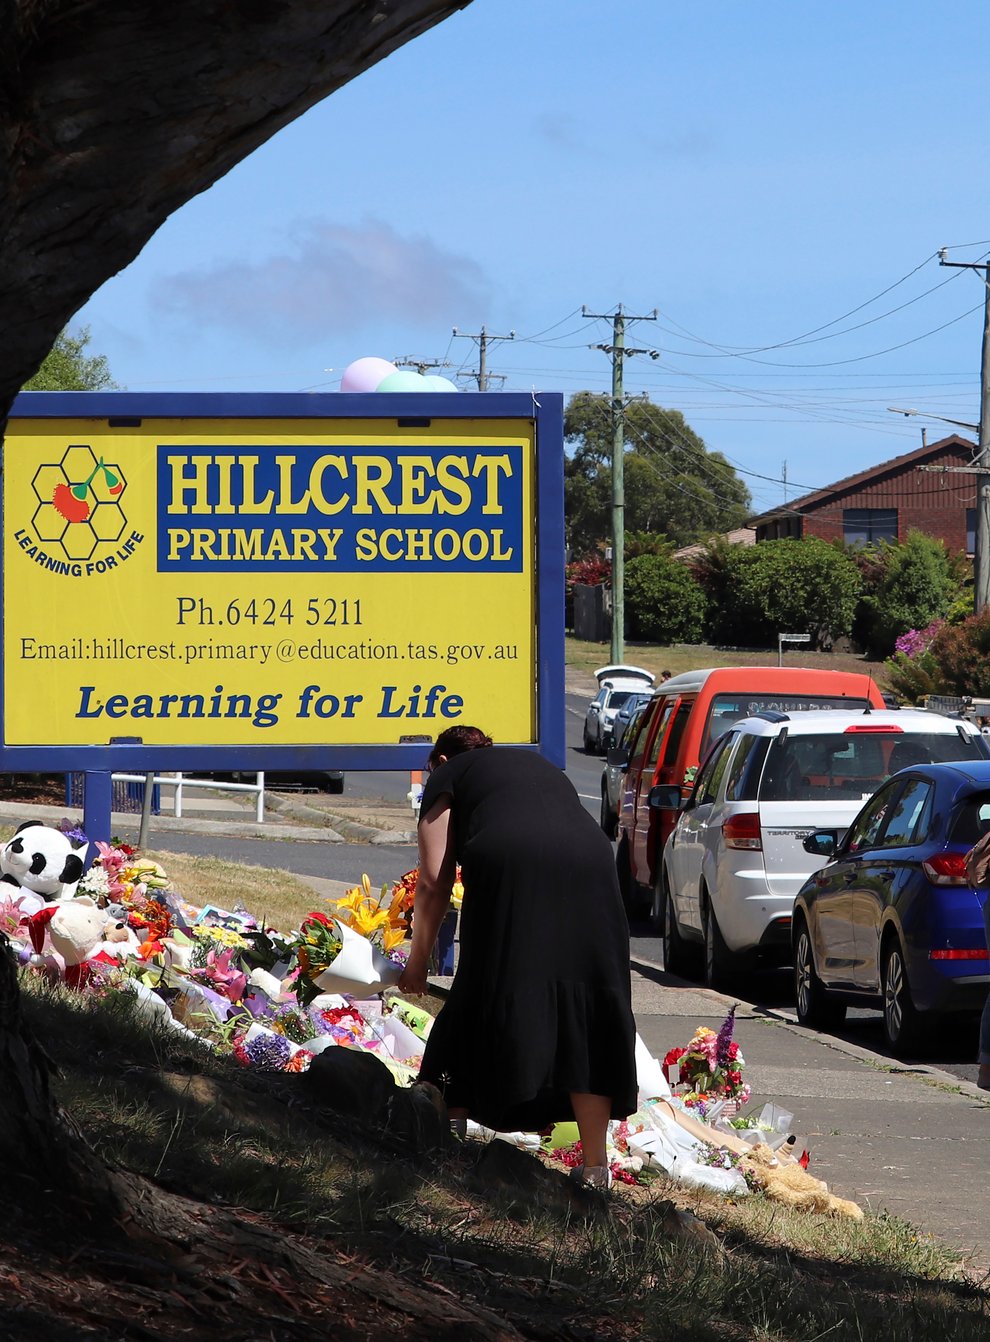 People leave flowers and tributes outside Hillcrest Primary School in Devonport, Tasmania (Ethan James/AAP Image via AP)